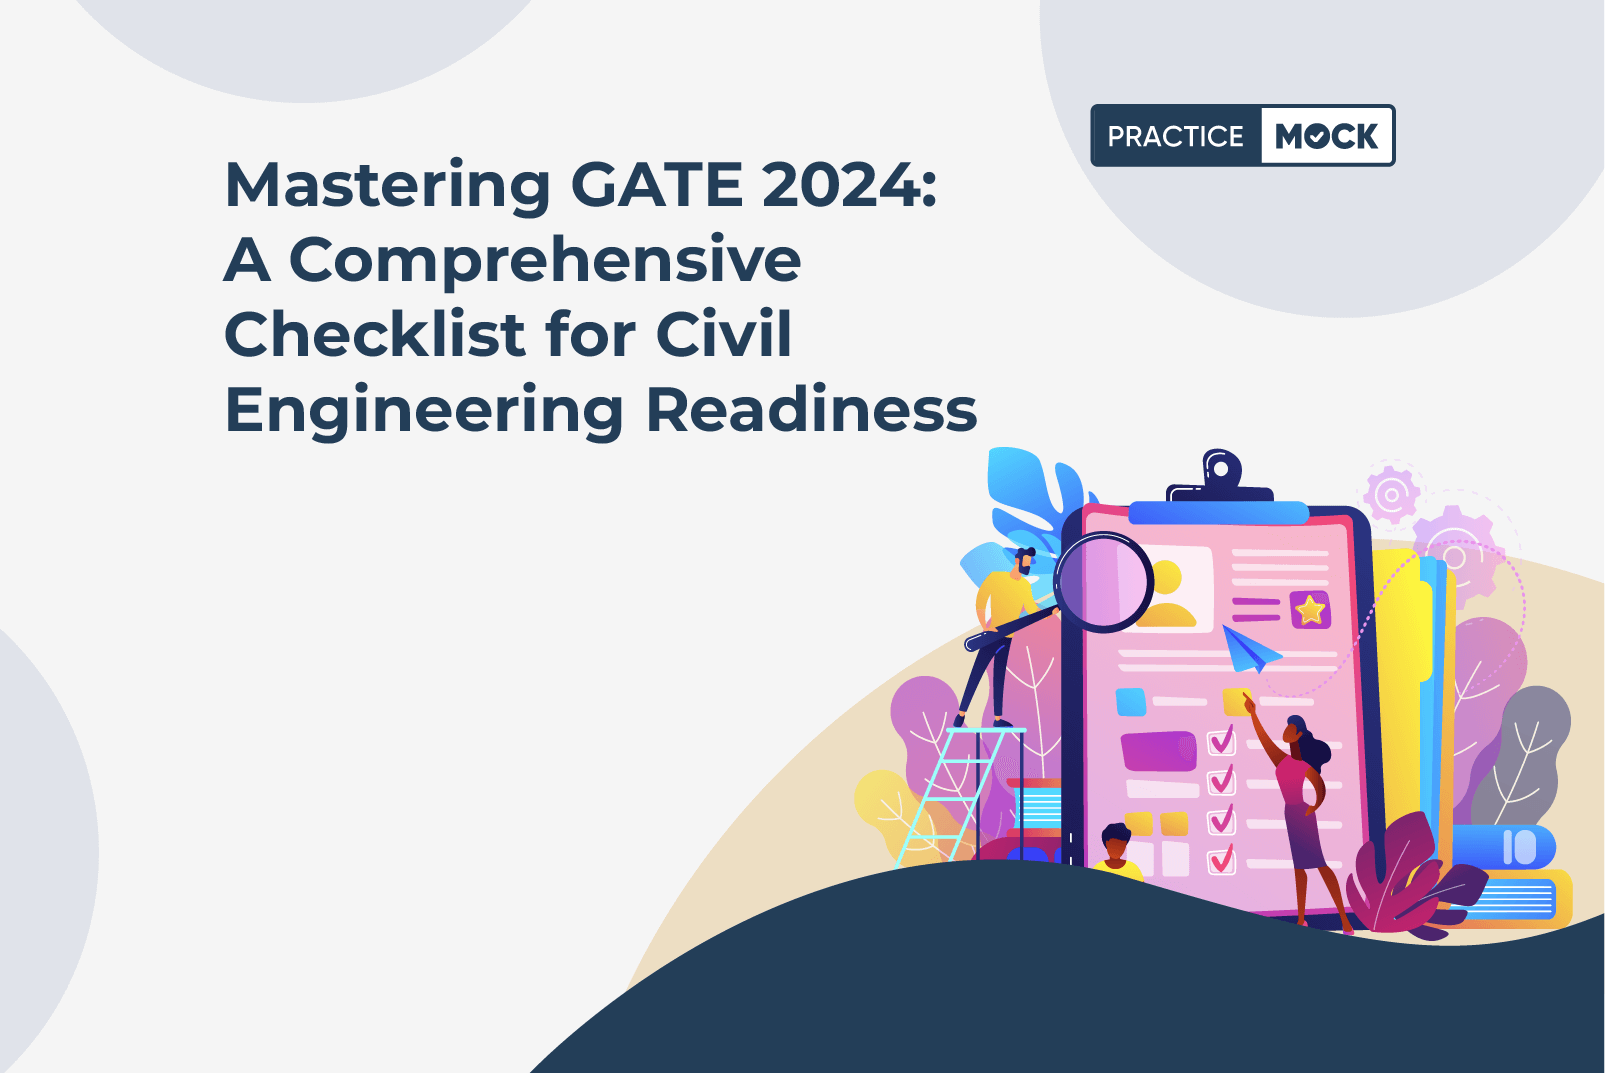 Mastering GATE 2024: A Comprehensive Checklist for Civil Engineering Readiness